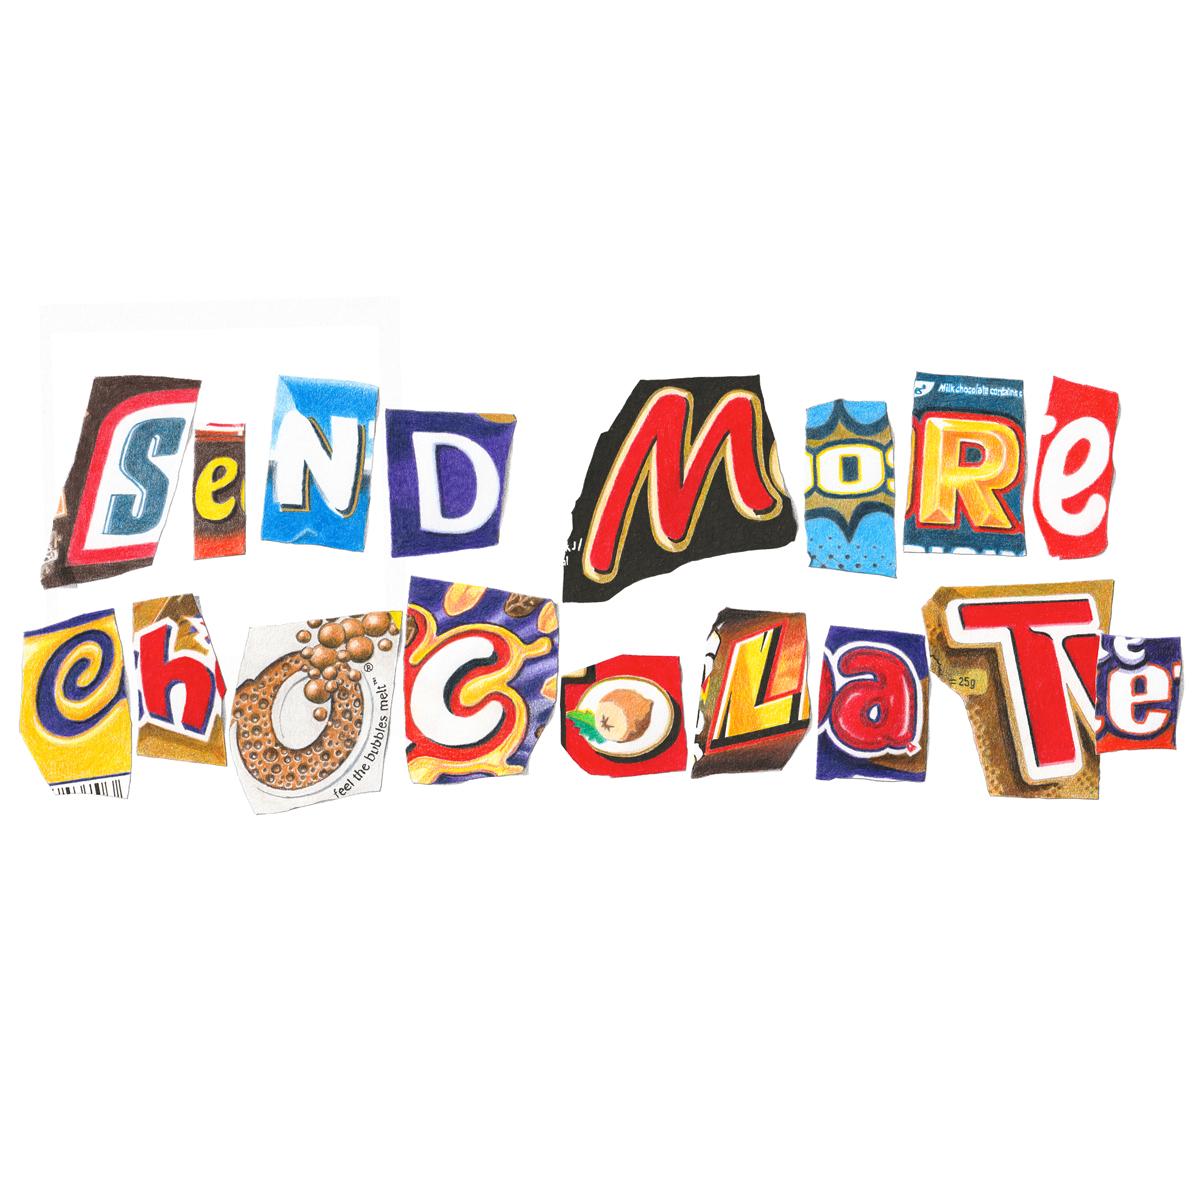 Limited edition print (large version) of drawing of cut-out letters - Send More Chocolate.